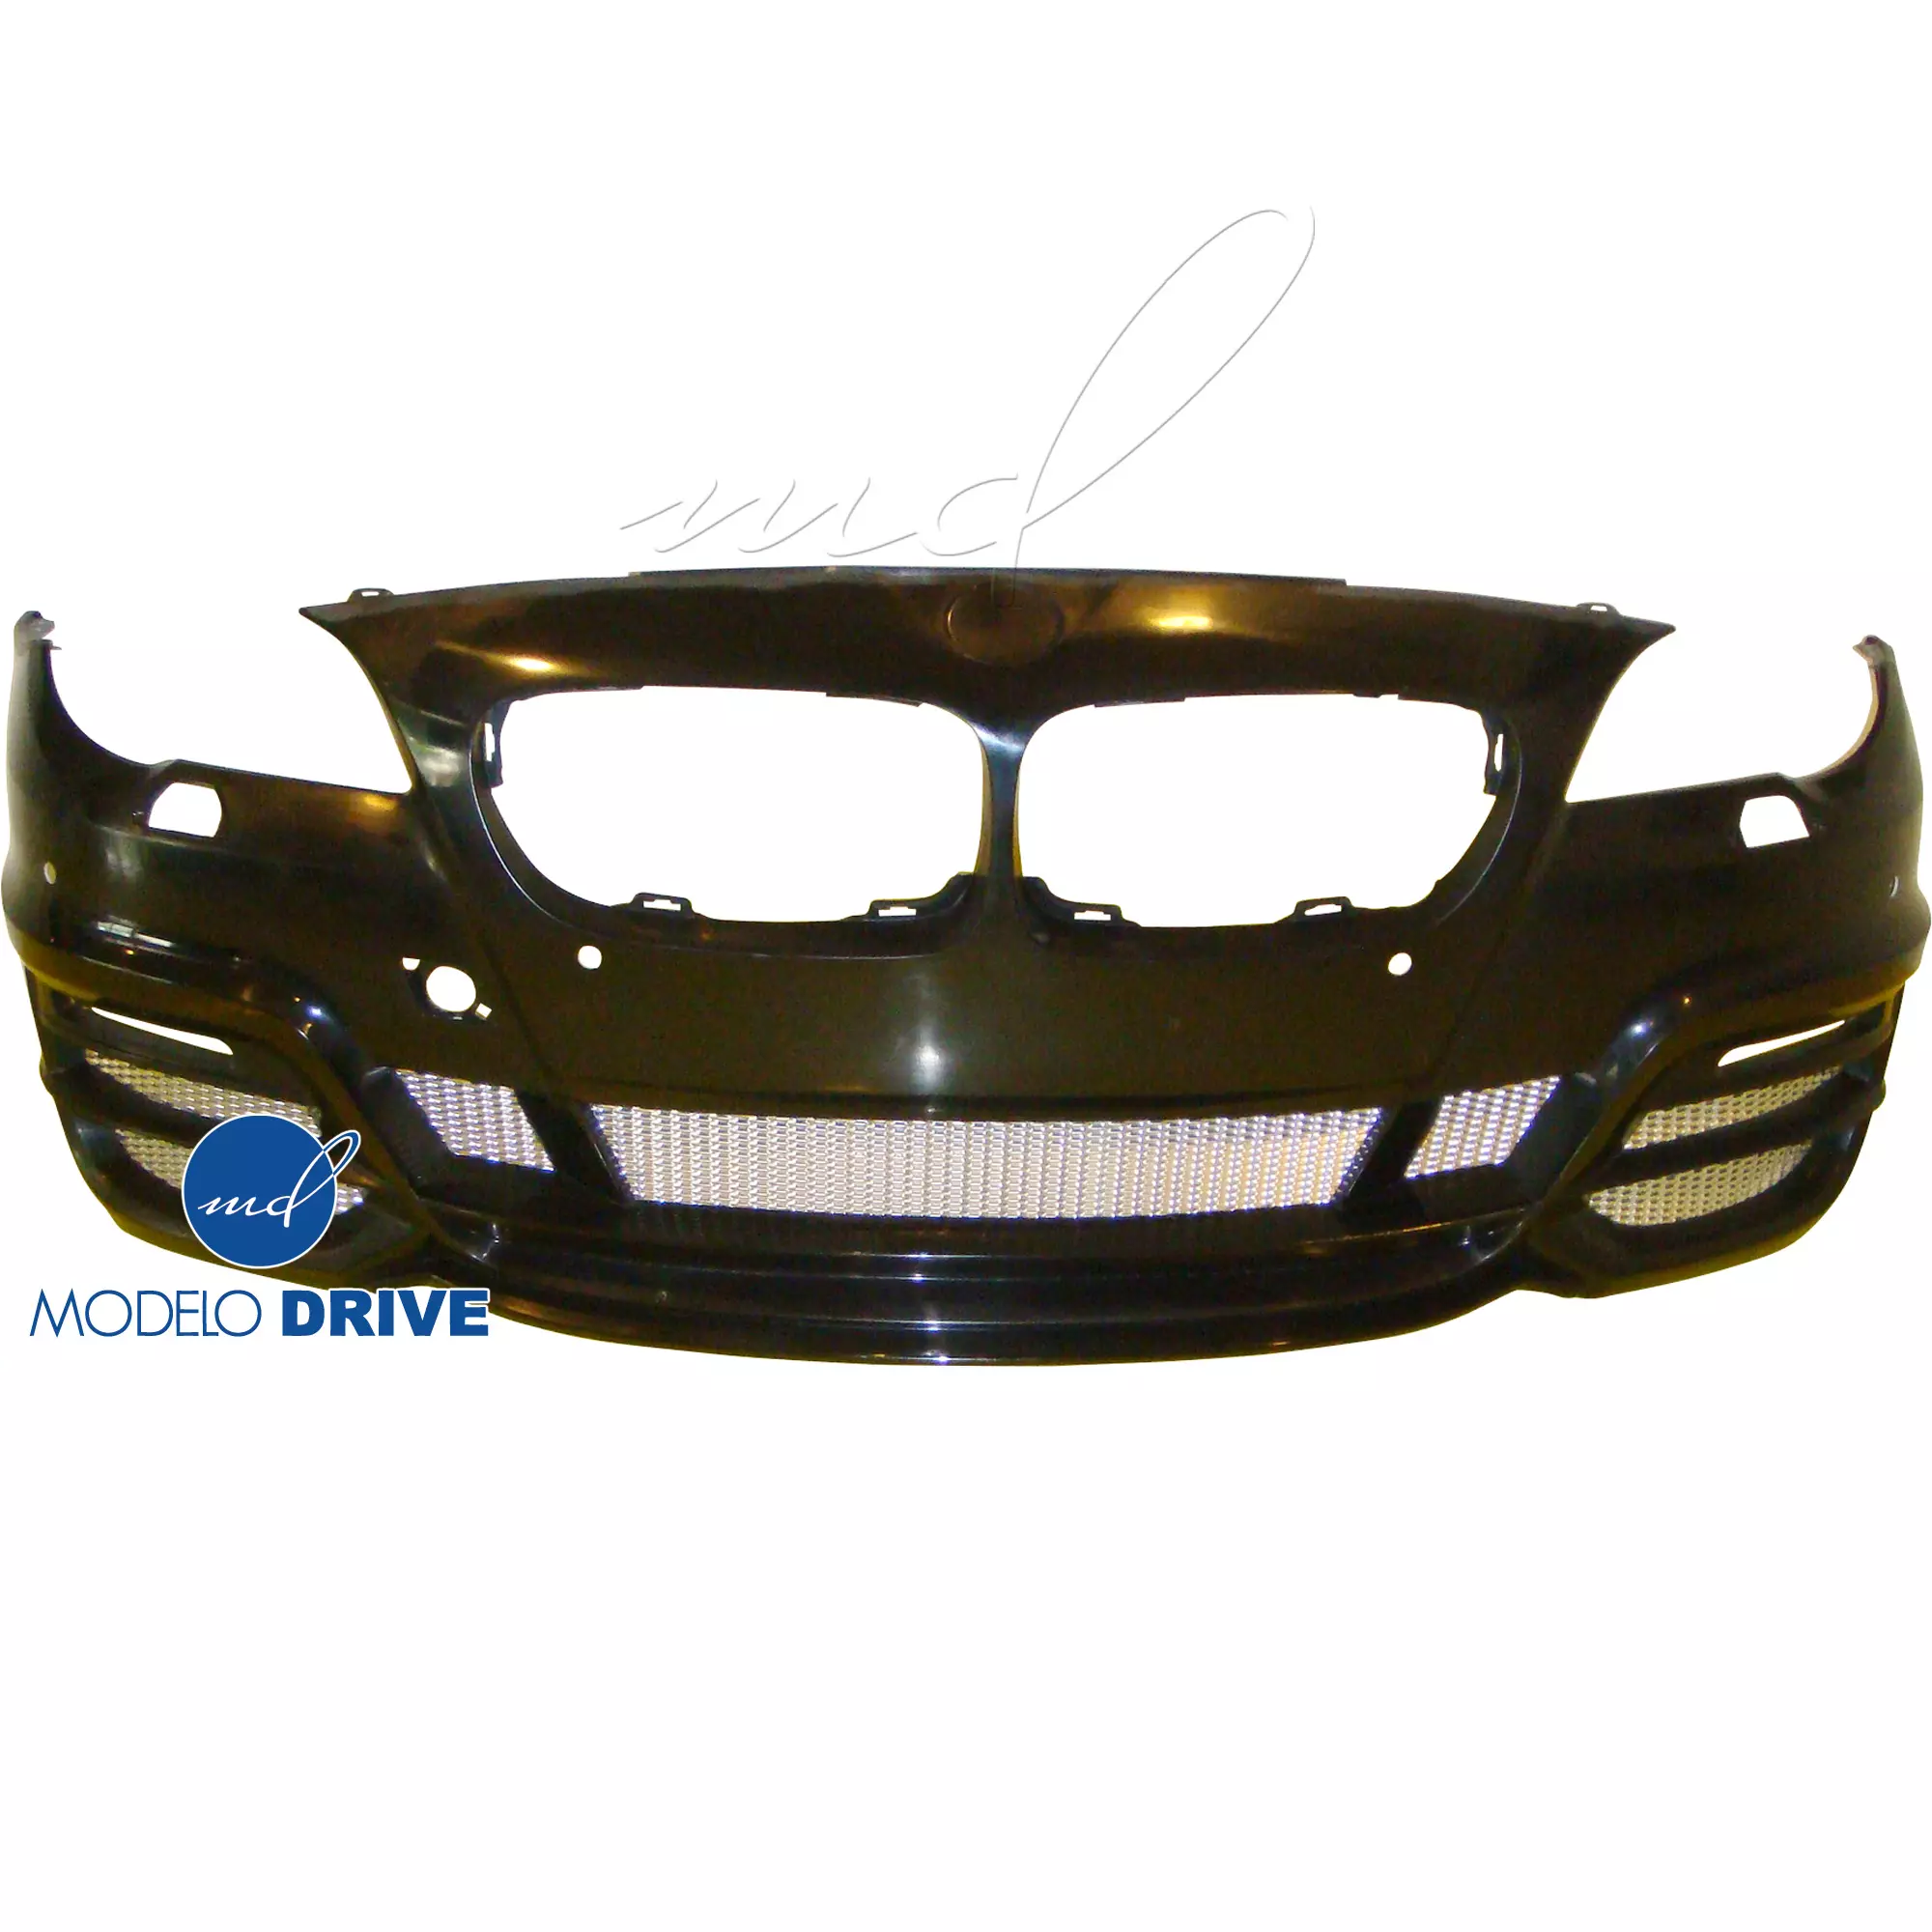 ModeloDrive FRP WAL Front Bumper > BMW 5-Series F10 2011-2016 > 4dr - Image 16